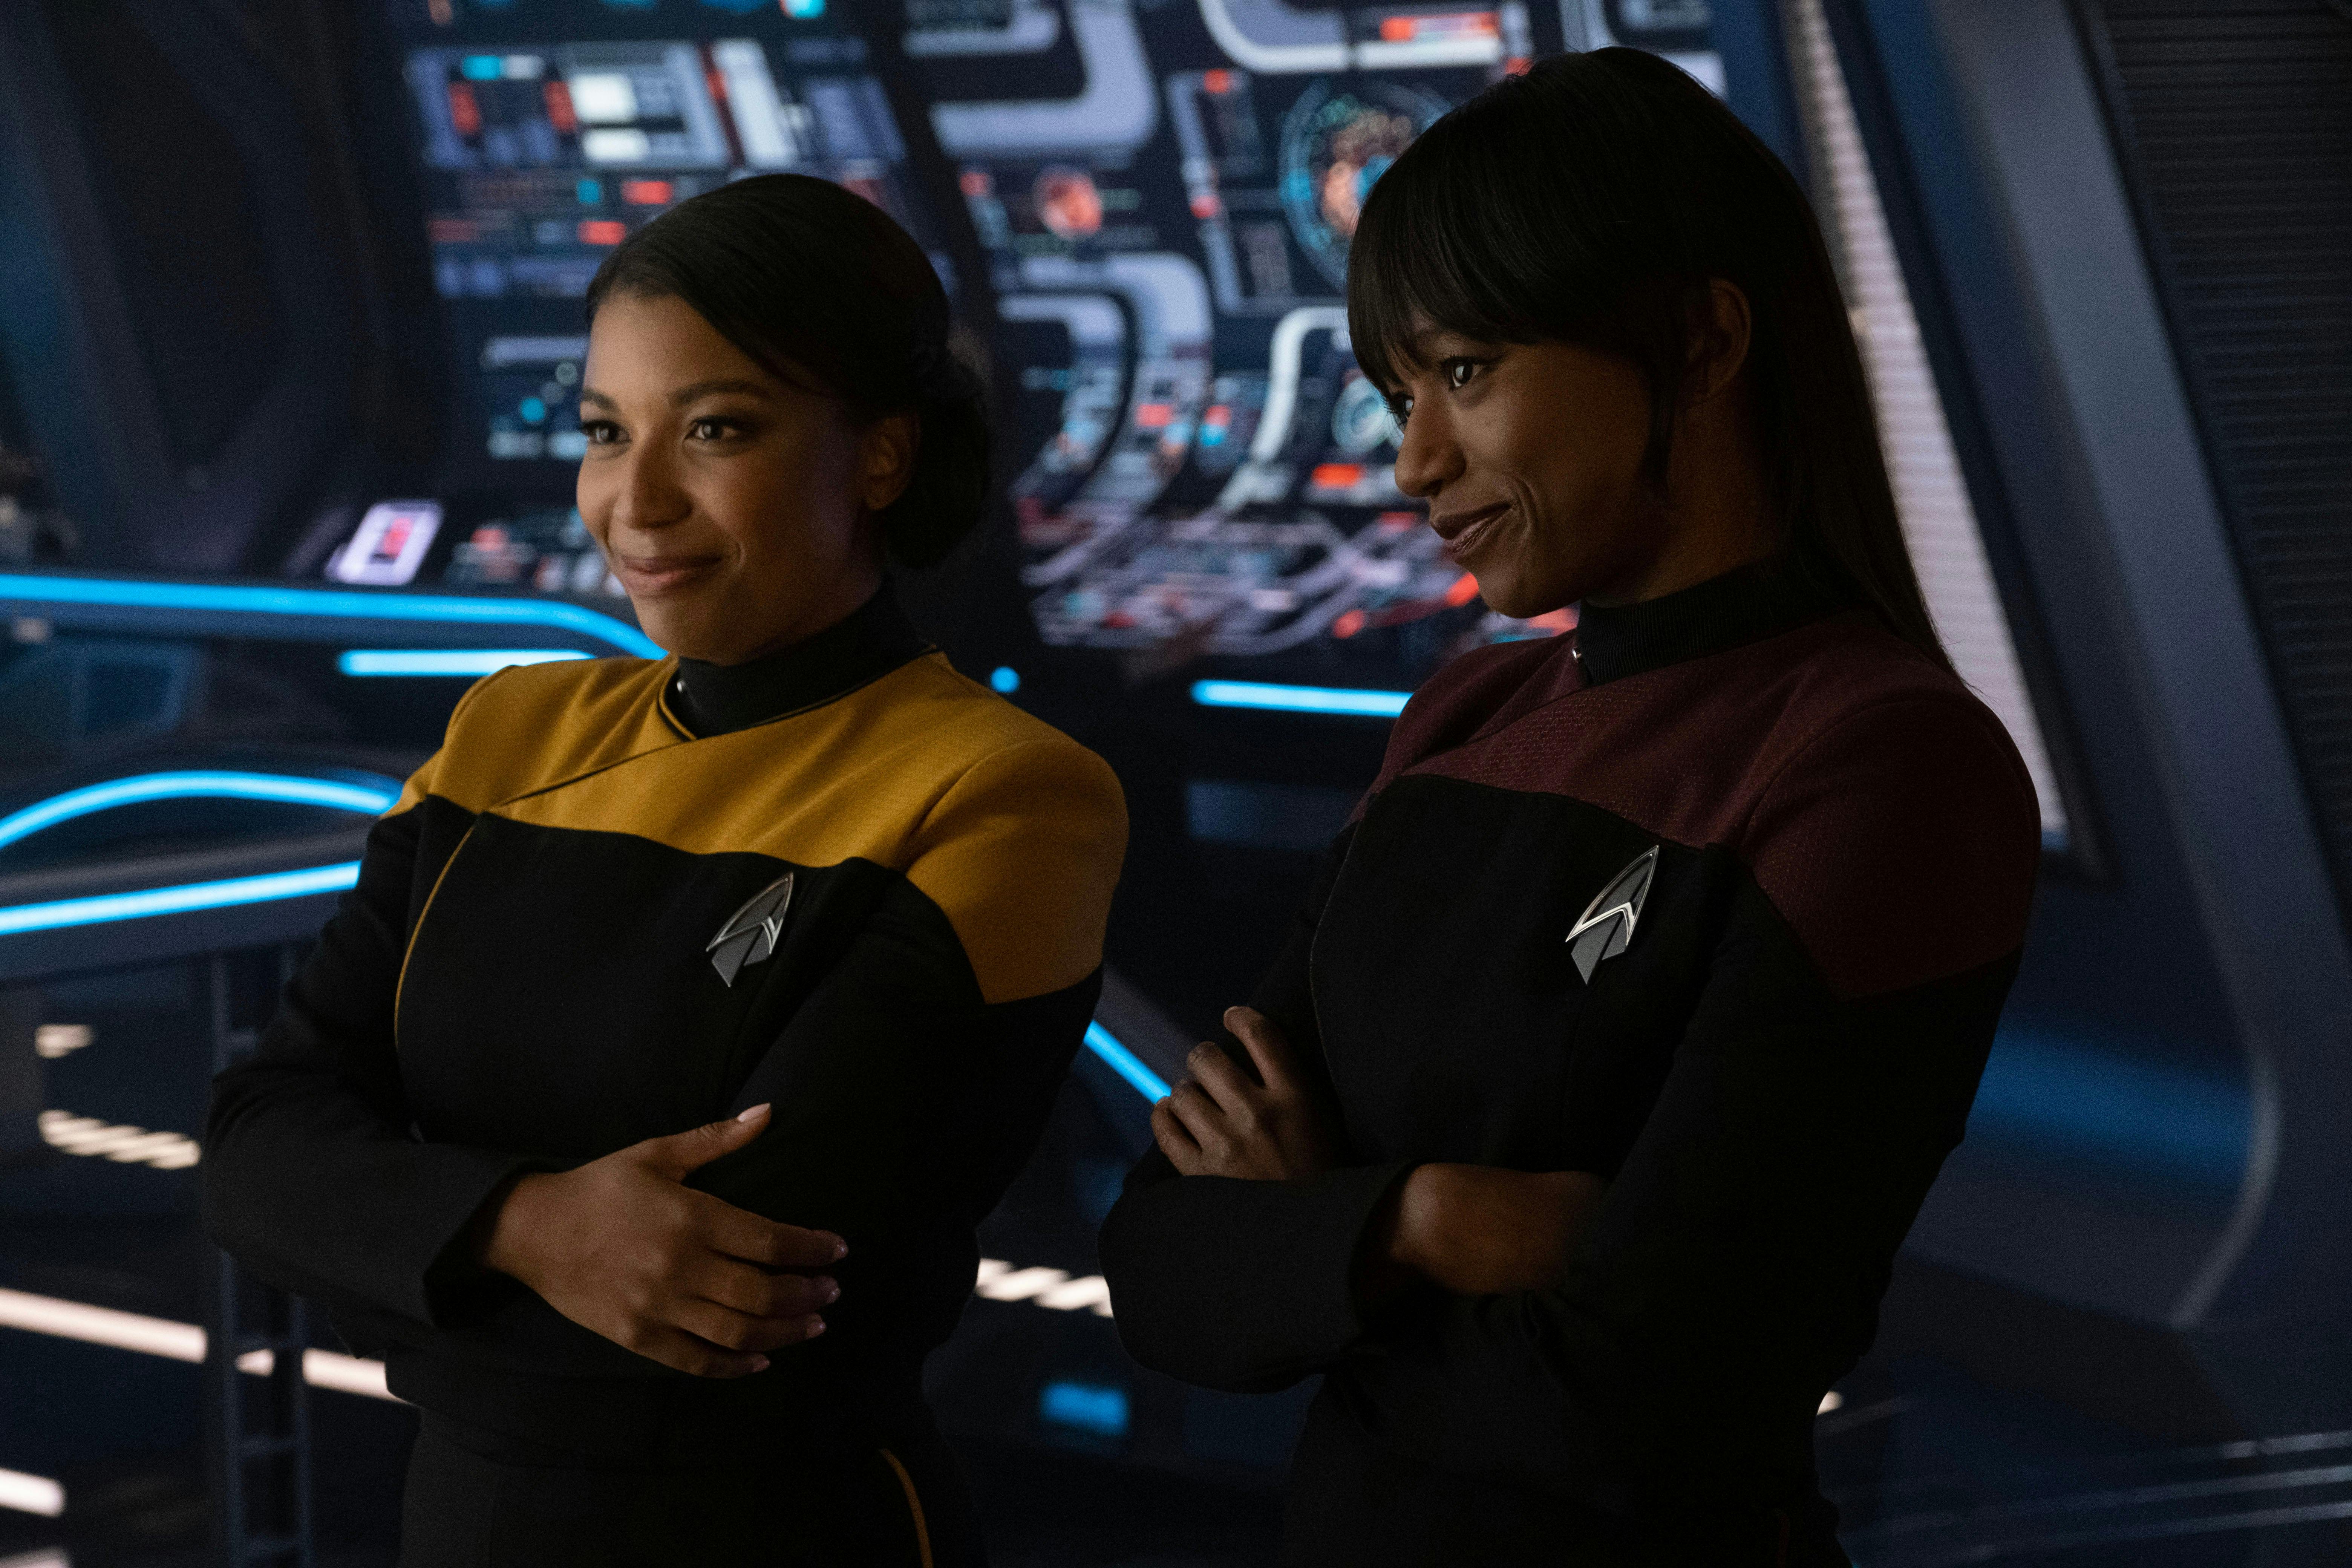 The La Forge sisters, Ensign Alandra and Ensign Sidney, stand side-by-side on the bridge of the Titan